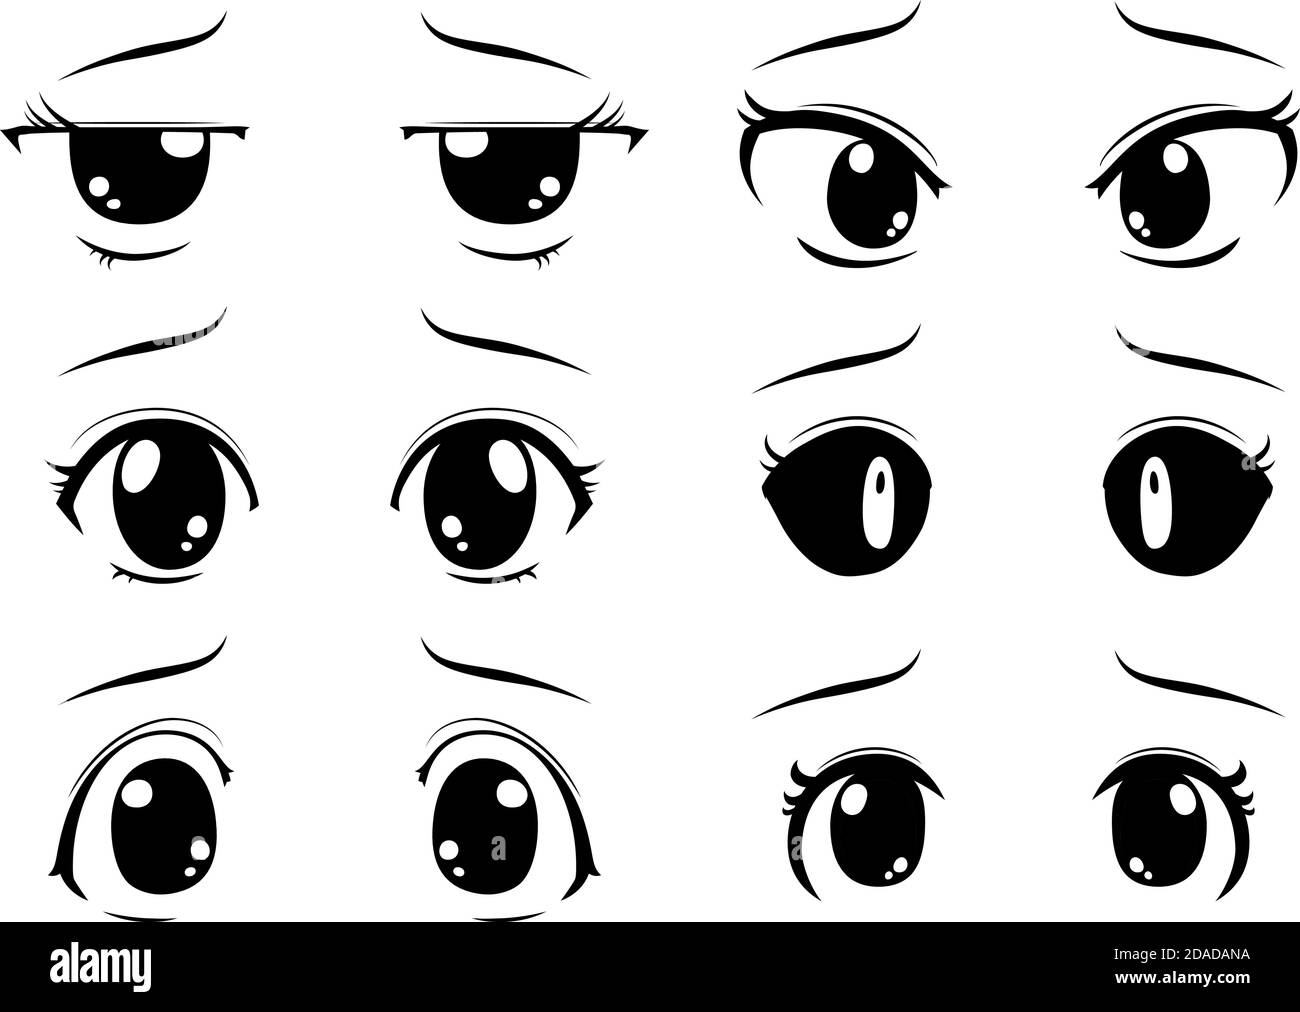 This is a illustration of Cute anime-style big black eyes with a sad ...